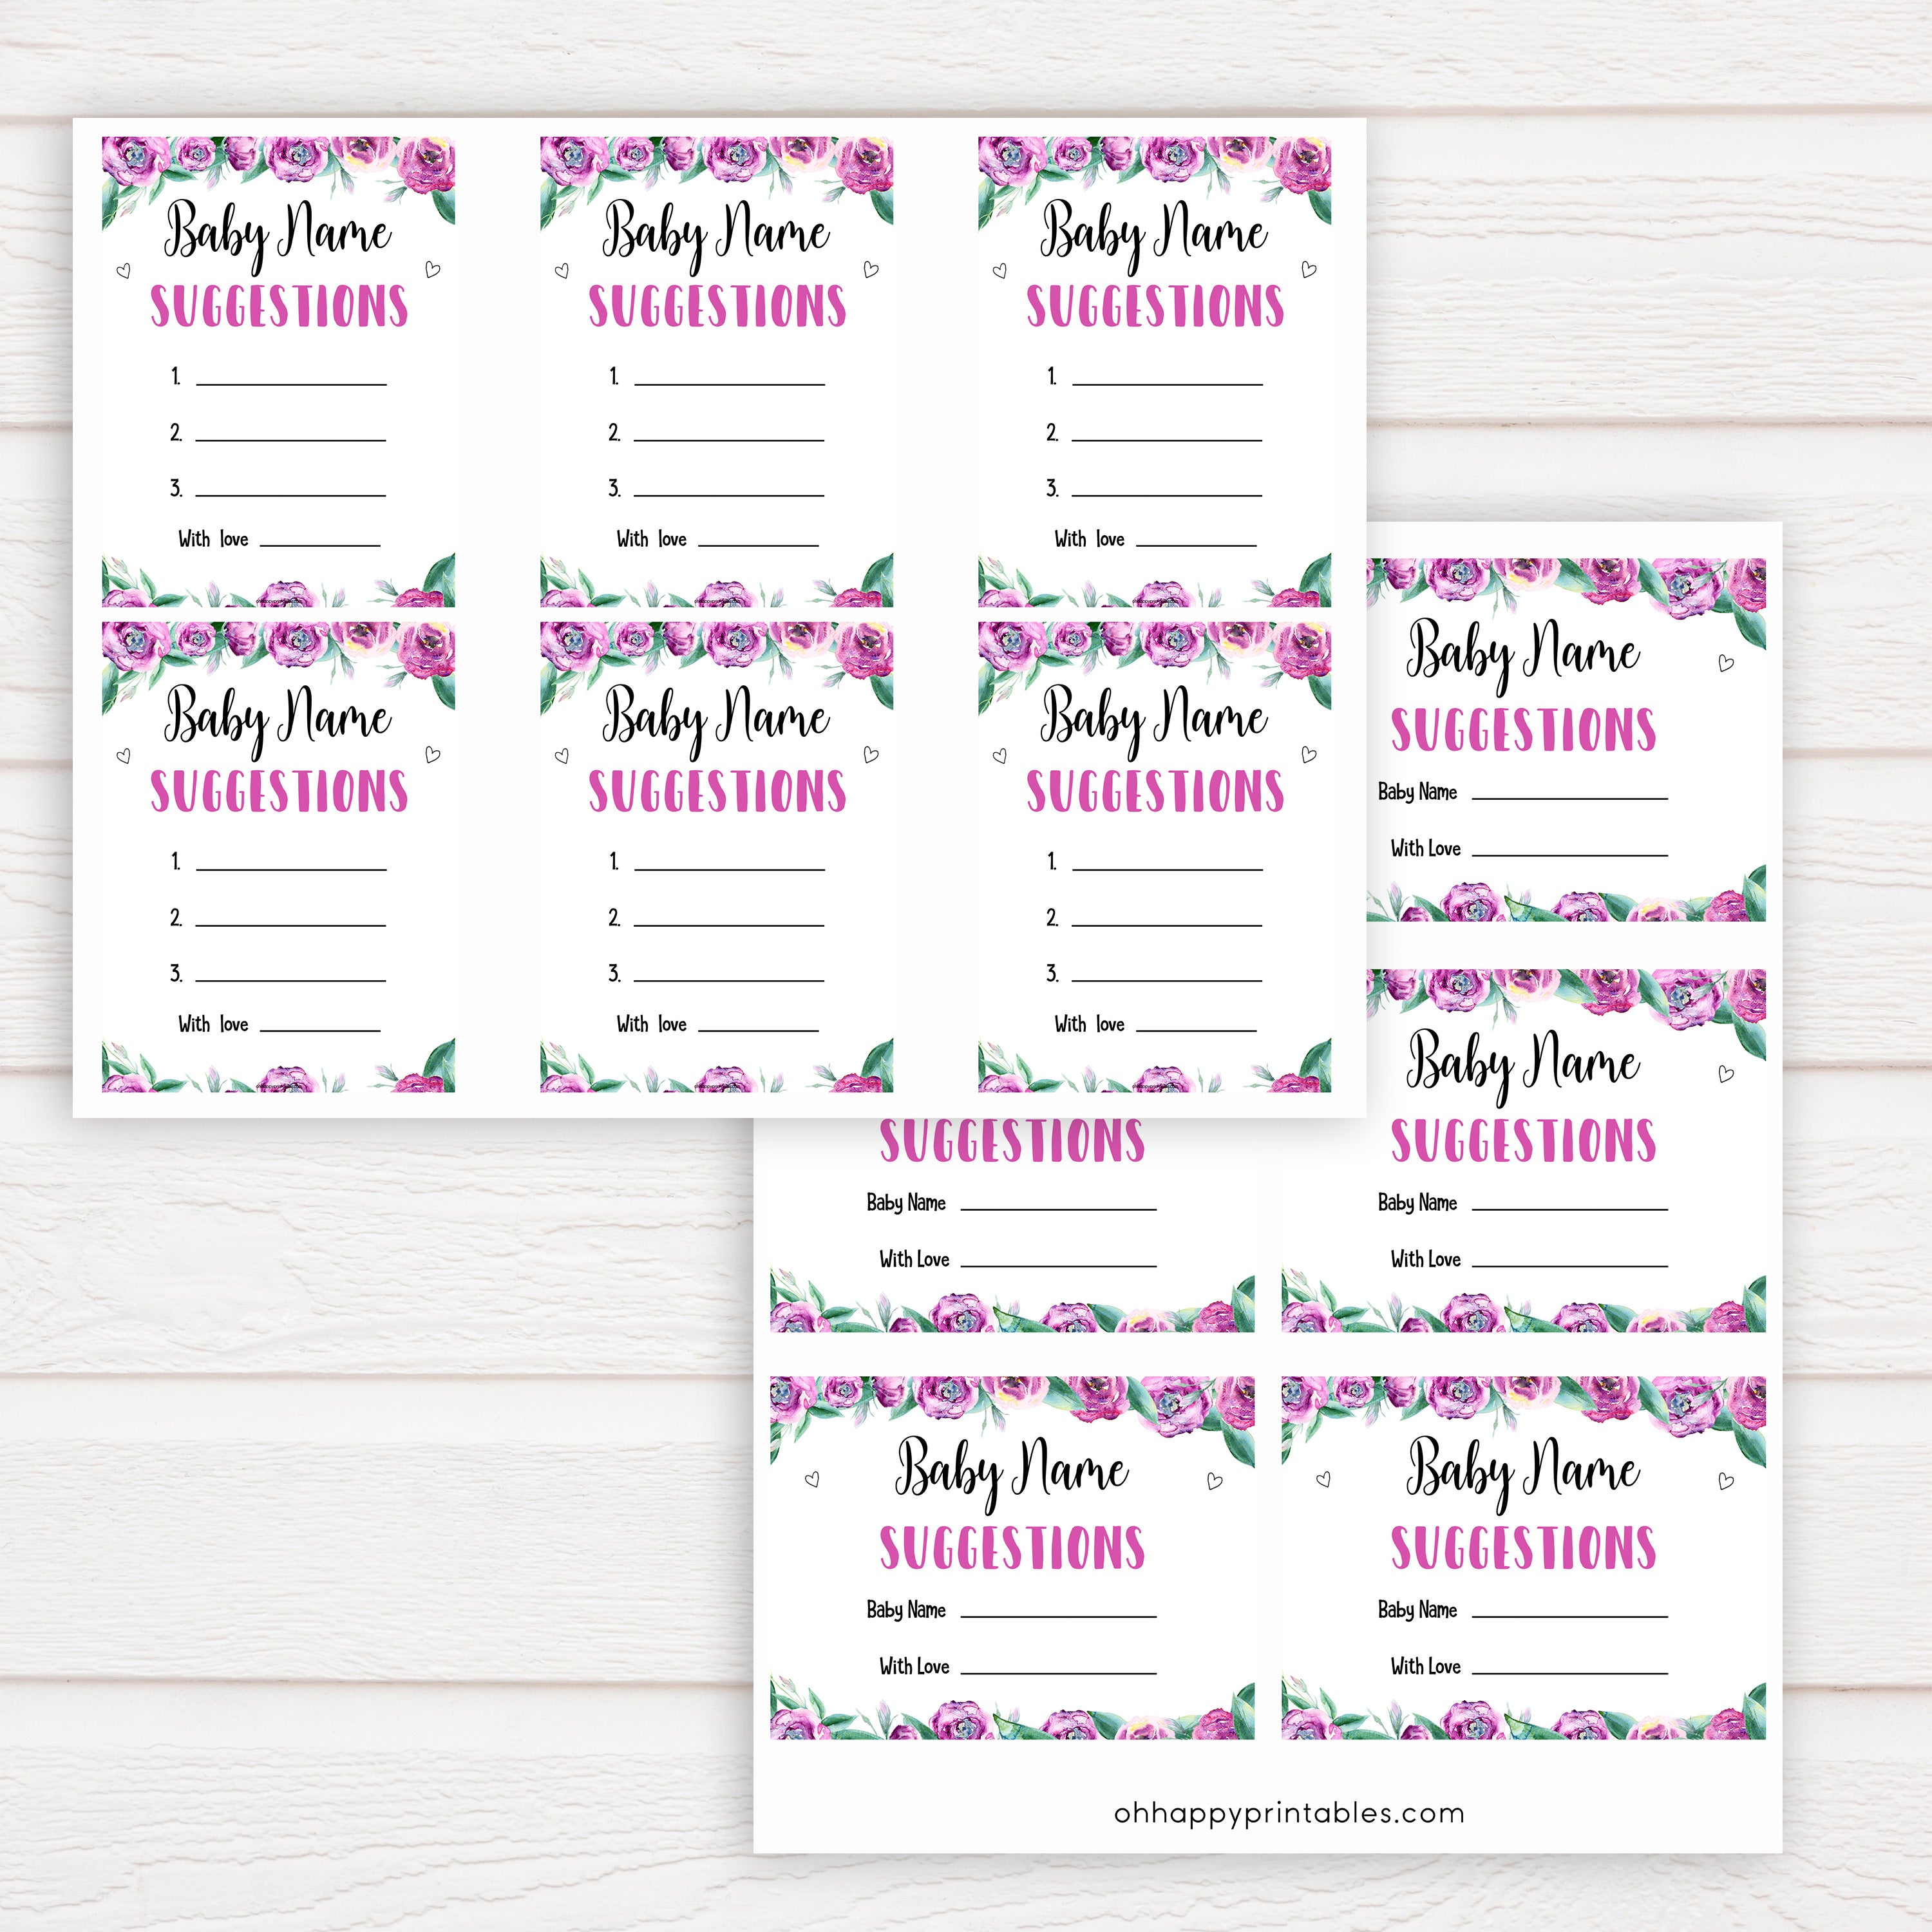 Purple peonies baby name suggestions baby shower games, printable baby shower games, fun baby shower games, baby shower games, popular baby shower games, floral baby shower games, purple baby shower themes